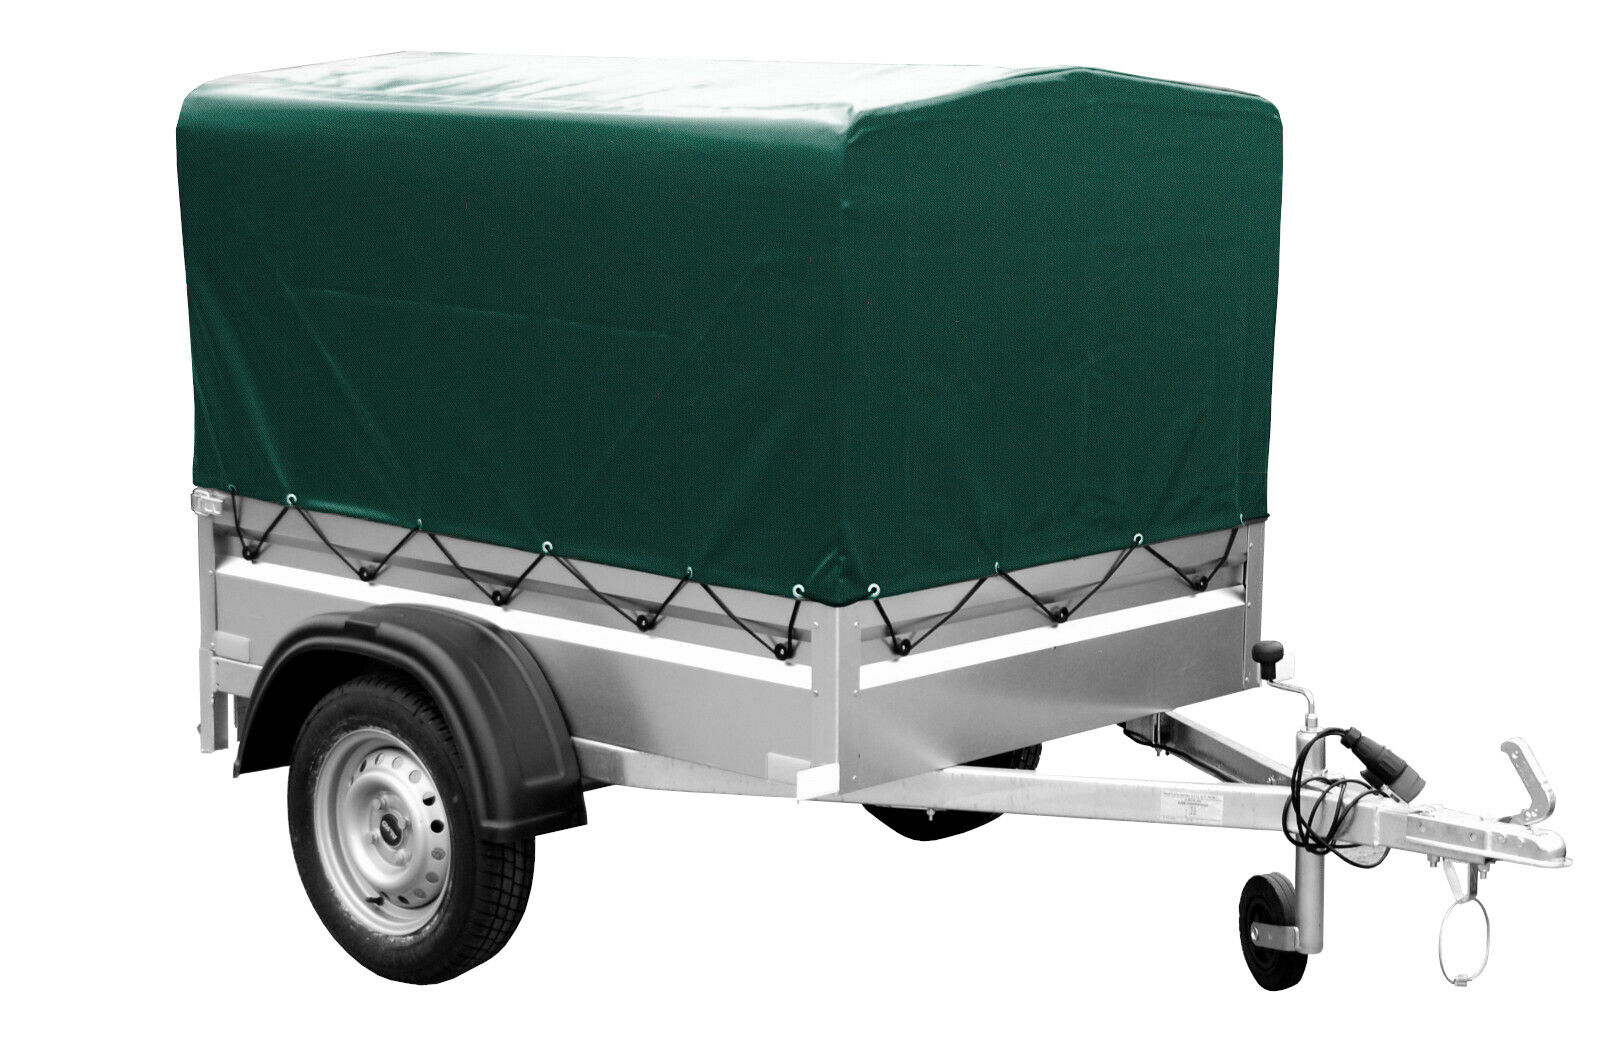 CAR TRAILER COVER, TENT, 125x95x50cm, CUSTOM MADE TO MEASURE, VARIOUS COLOURS FIRTSLY